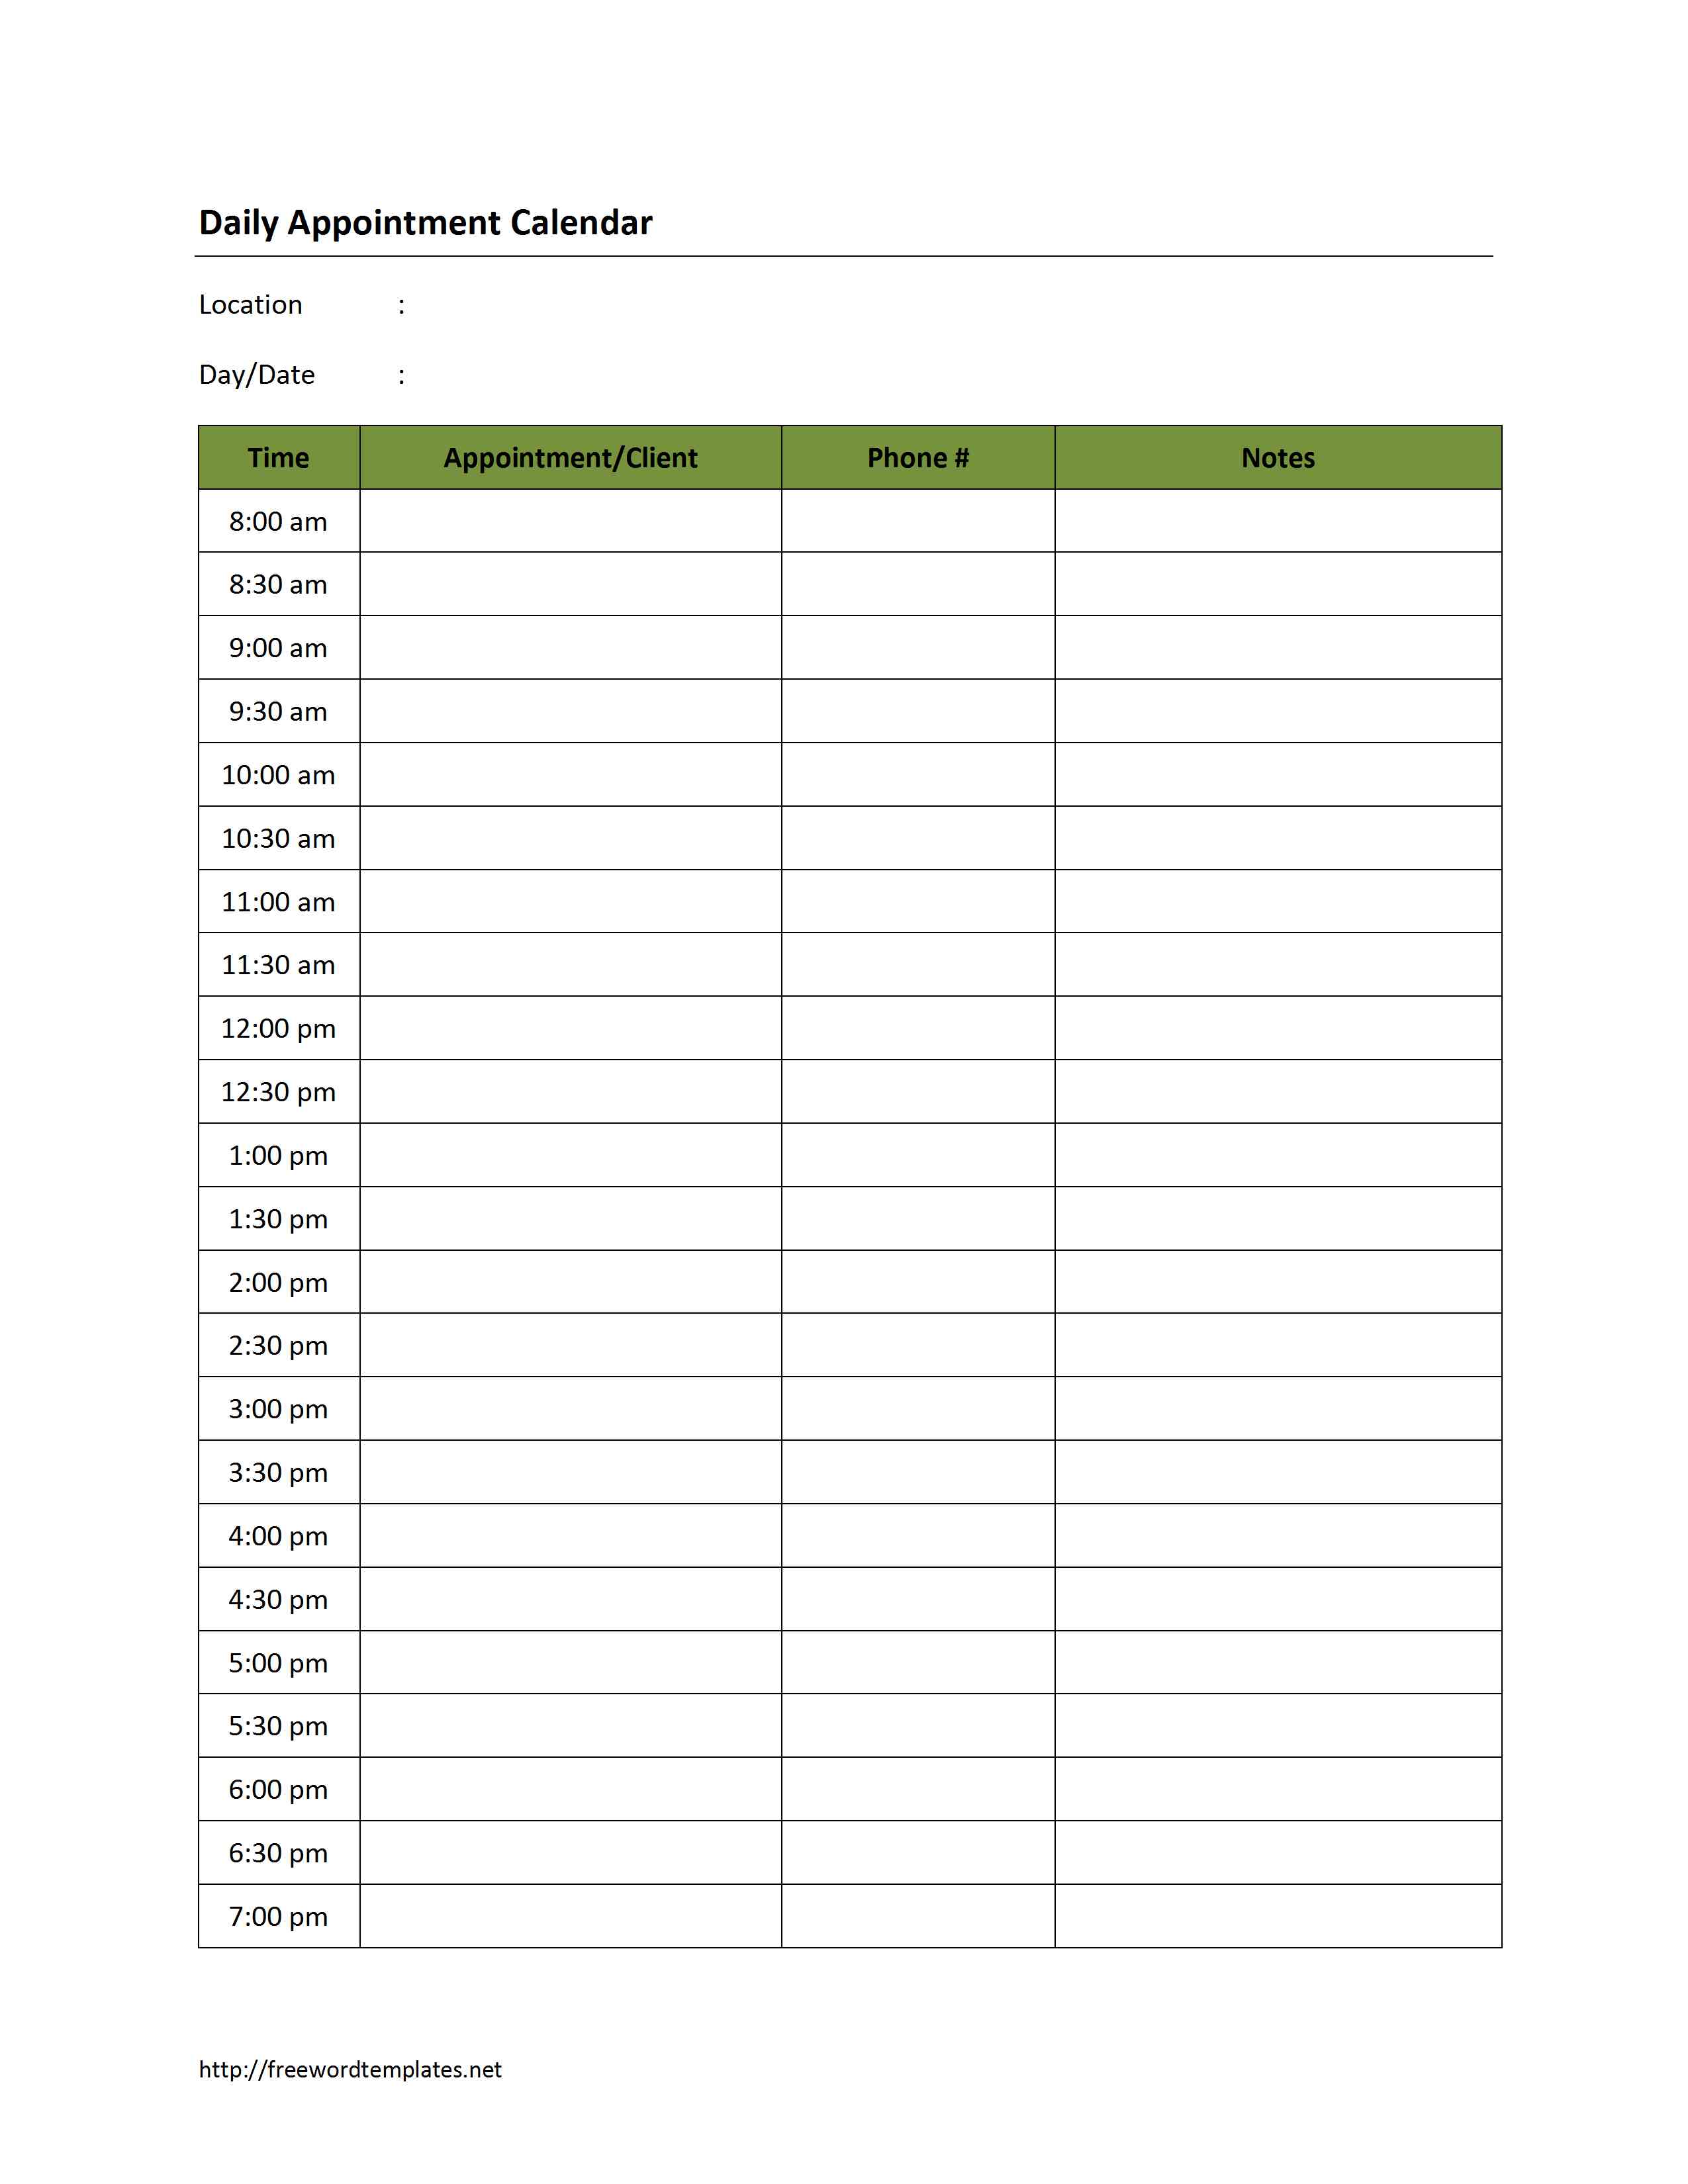 Daily Appointment Calendar Template | Free Microsoft Word Templates